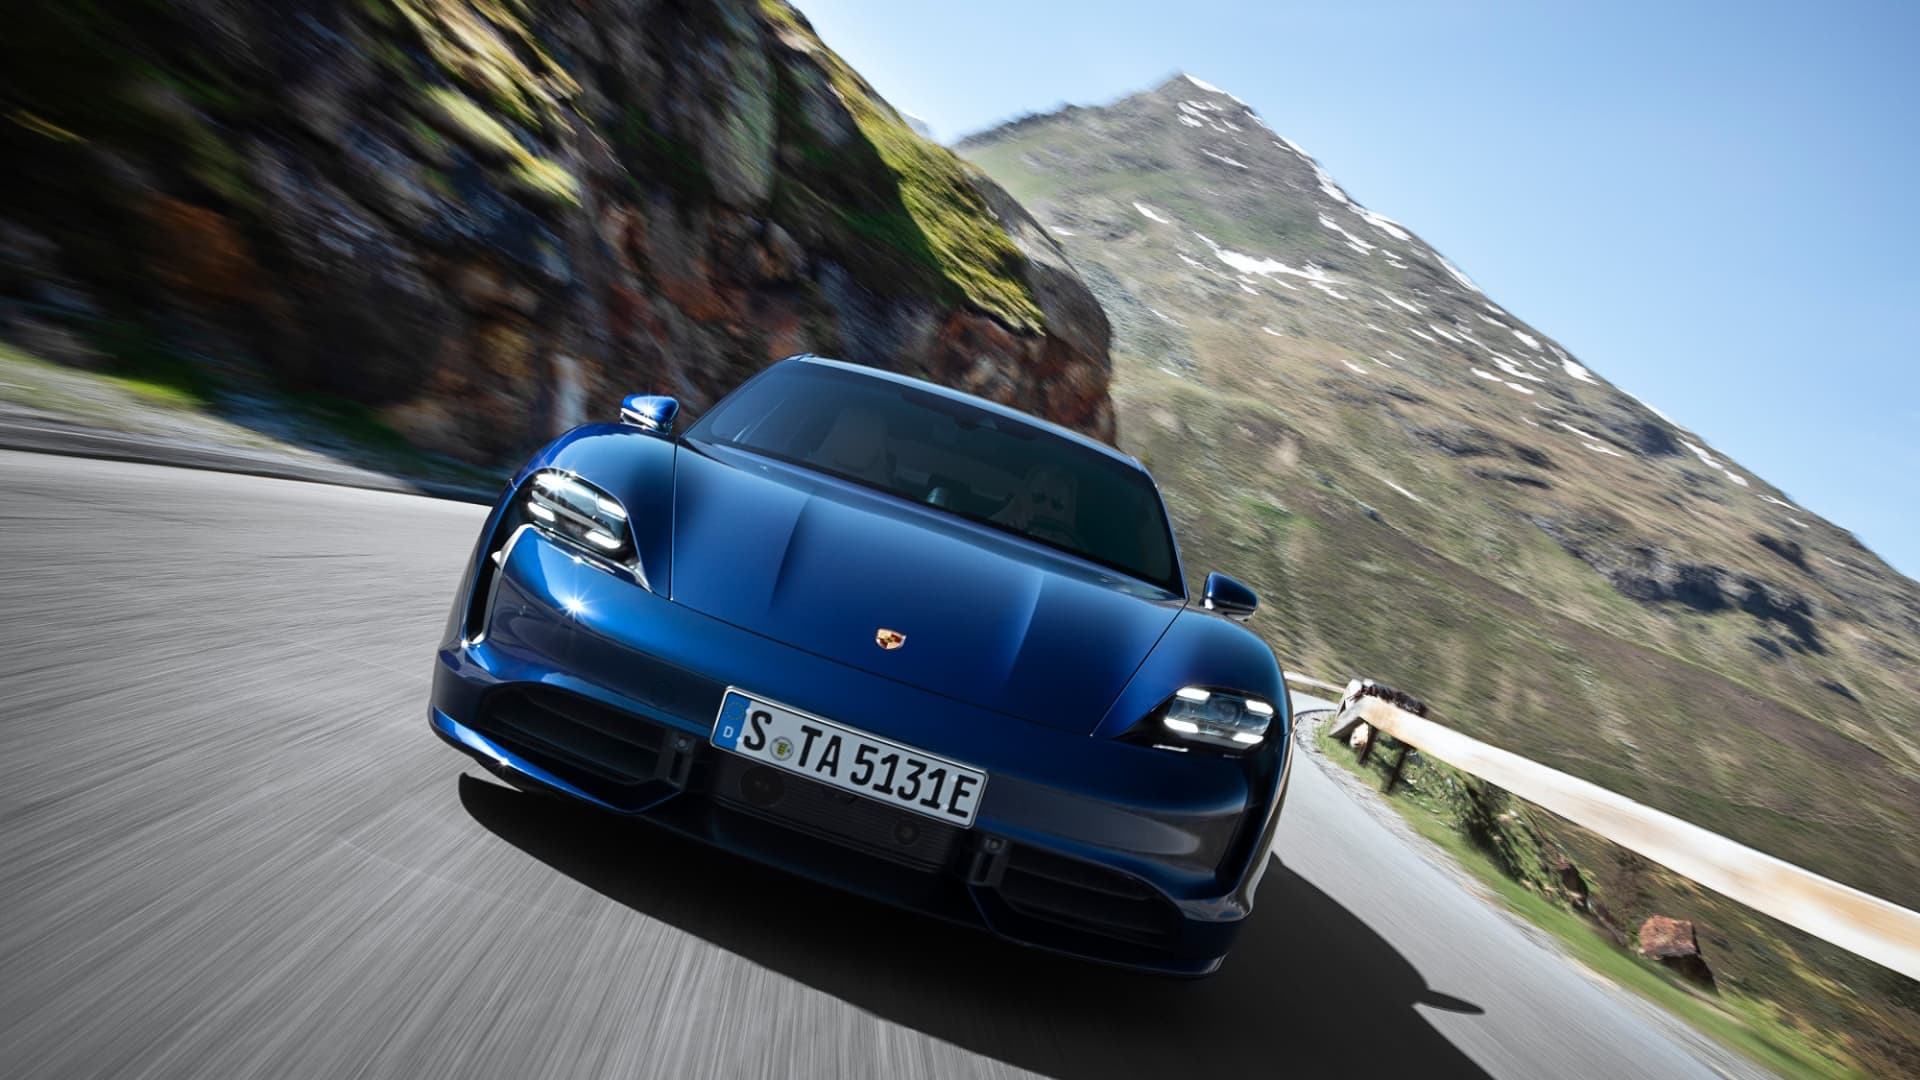 Luxury automaker Porsche issues growth outlook after record 2022 earnings Auto Recent